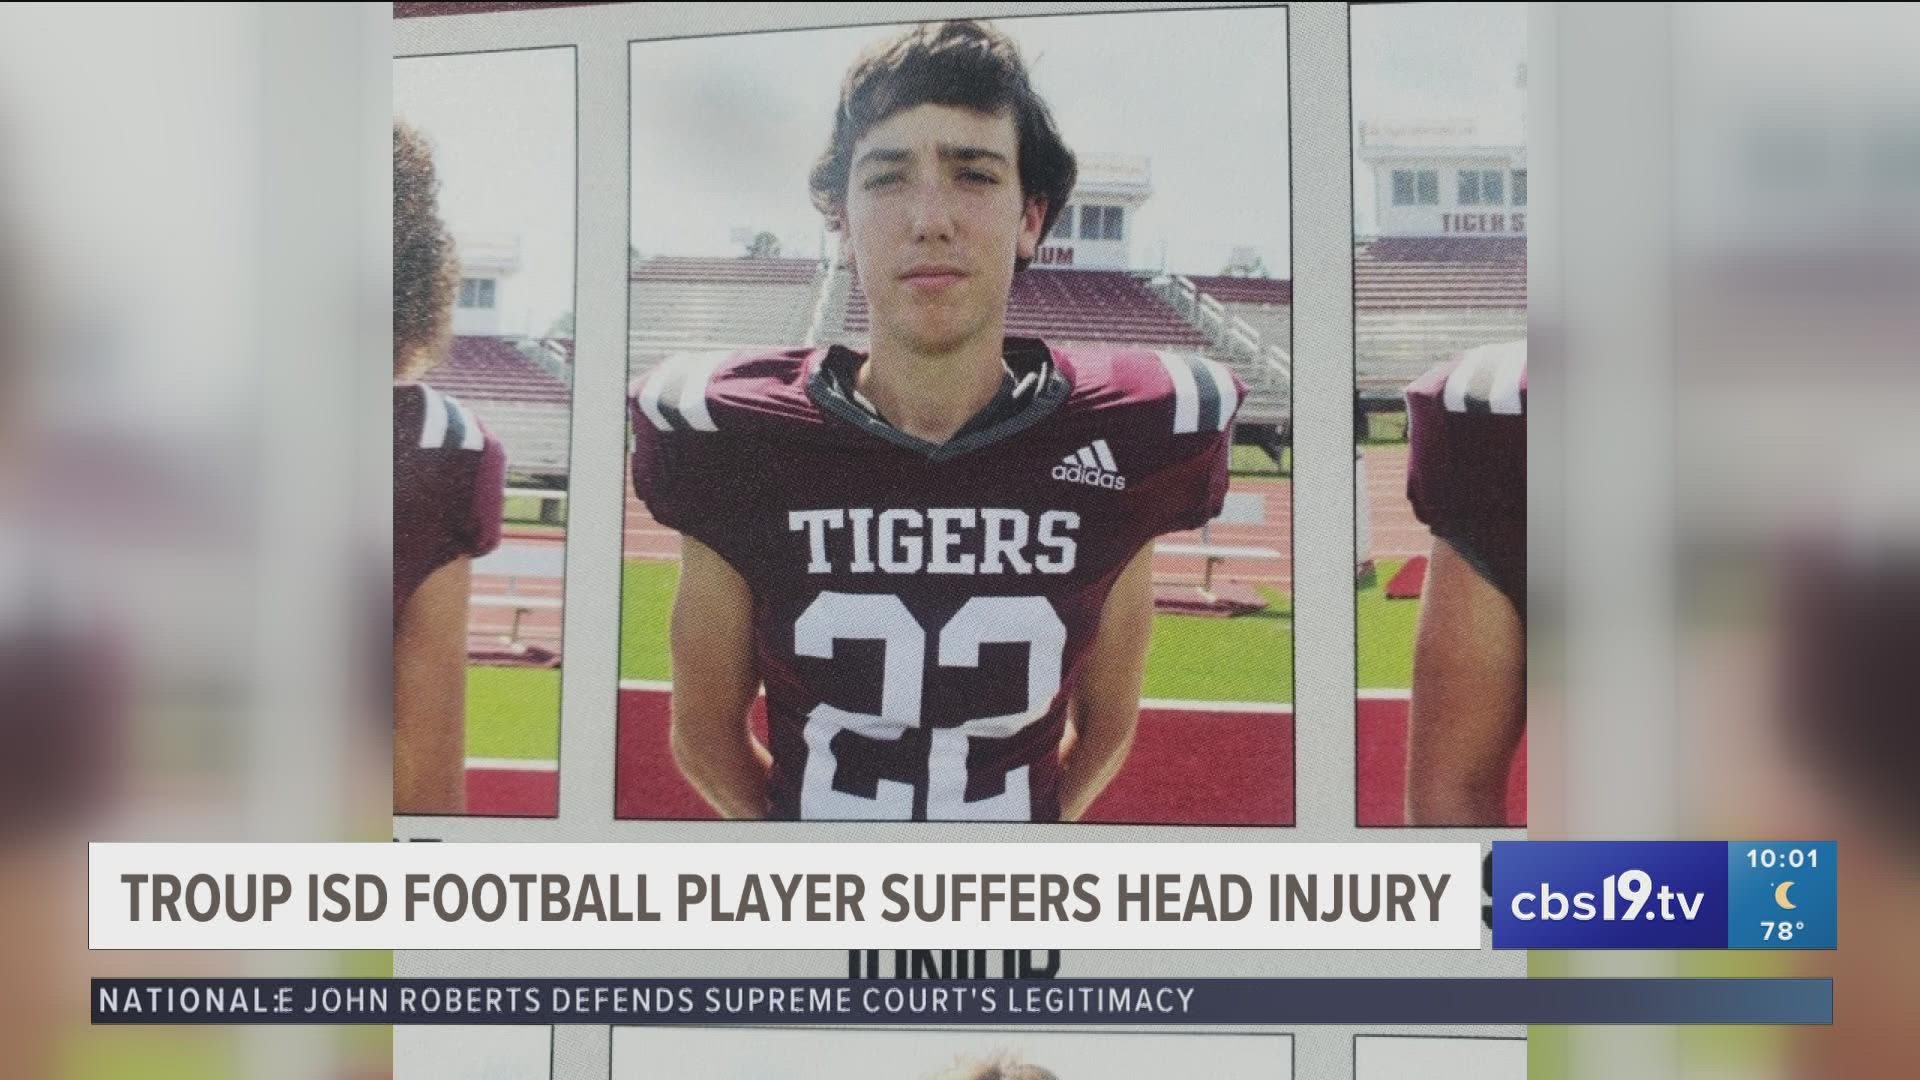 According to First Baptist Church Troup, Cooper Reid, a junior at Troup High School was injured during Troup's homecoming matchup against Buffalo.